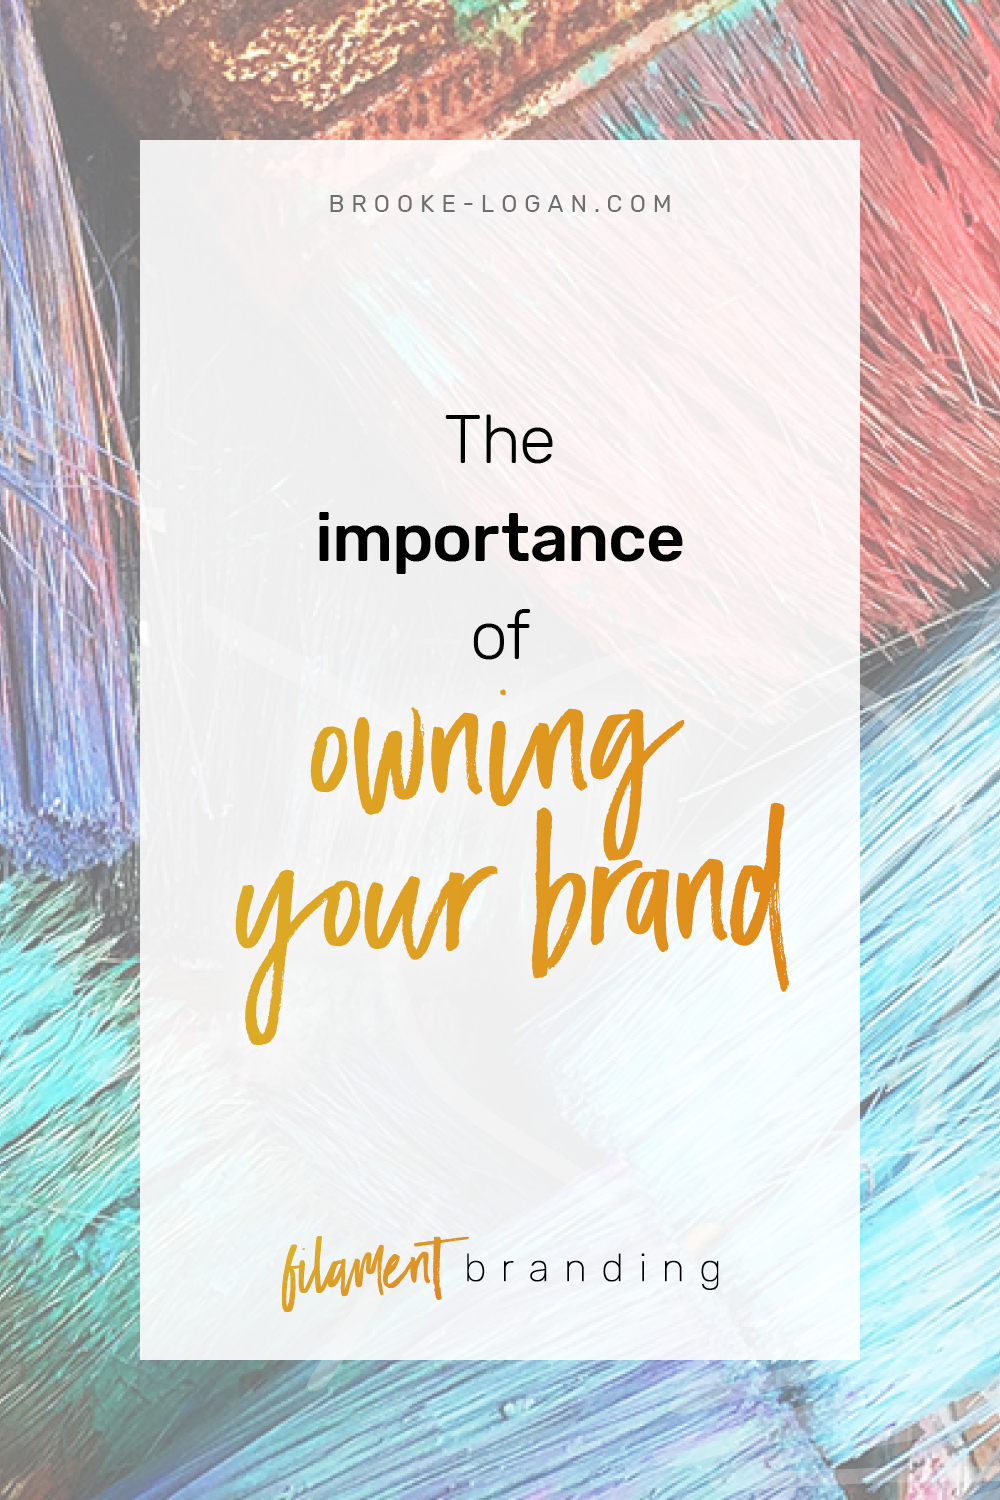 Ep 3: The importance of OWNING your brand with Brooke Logan